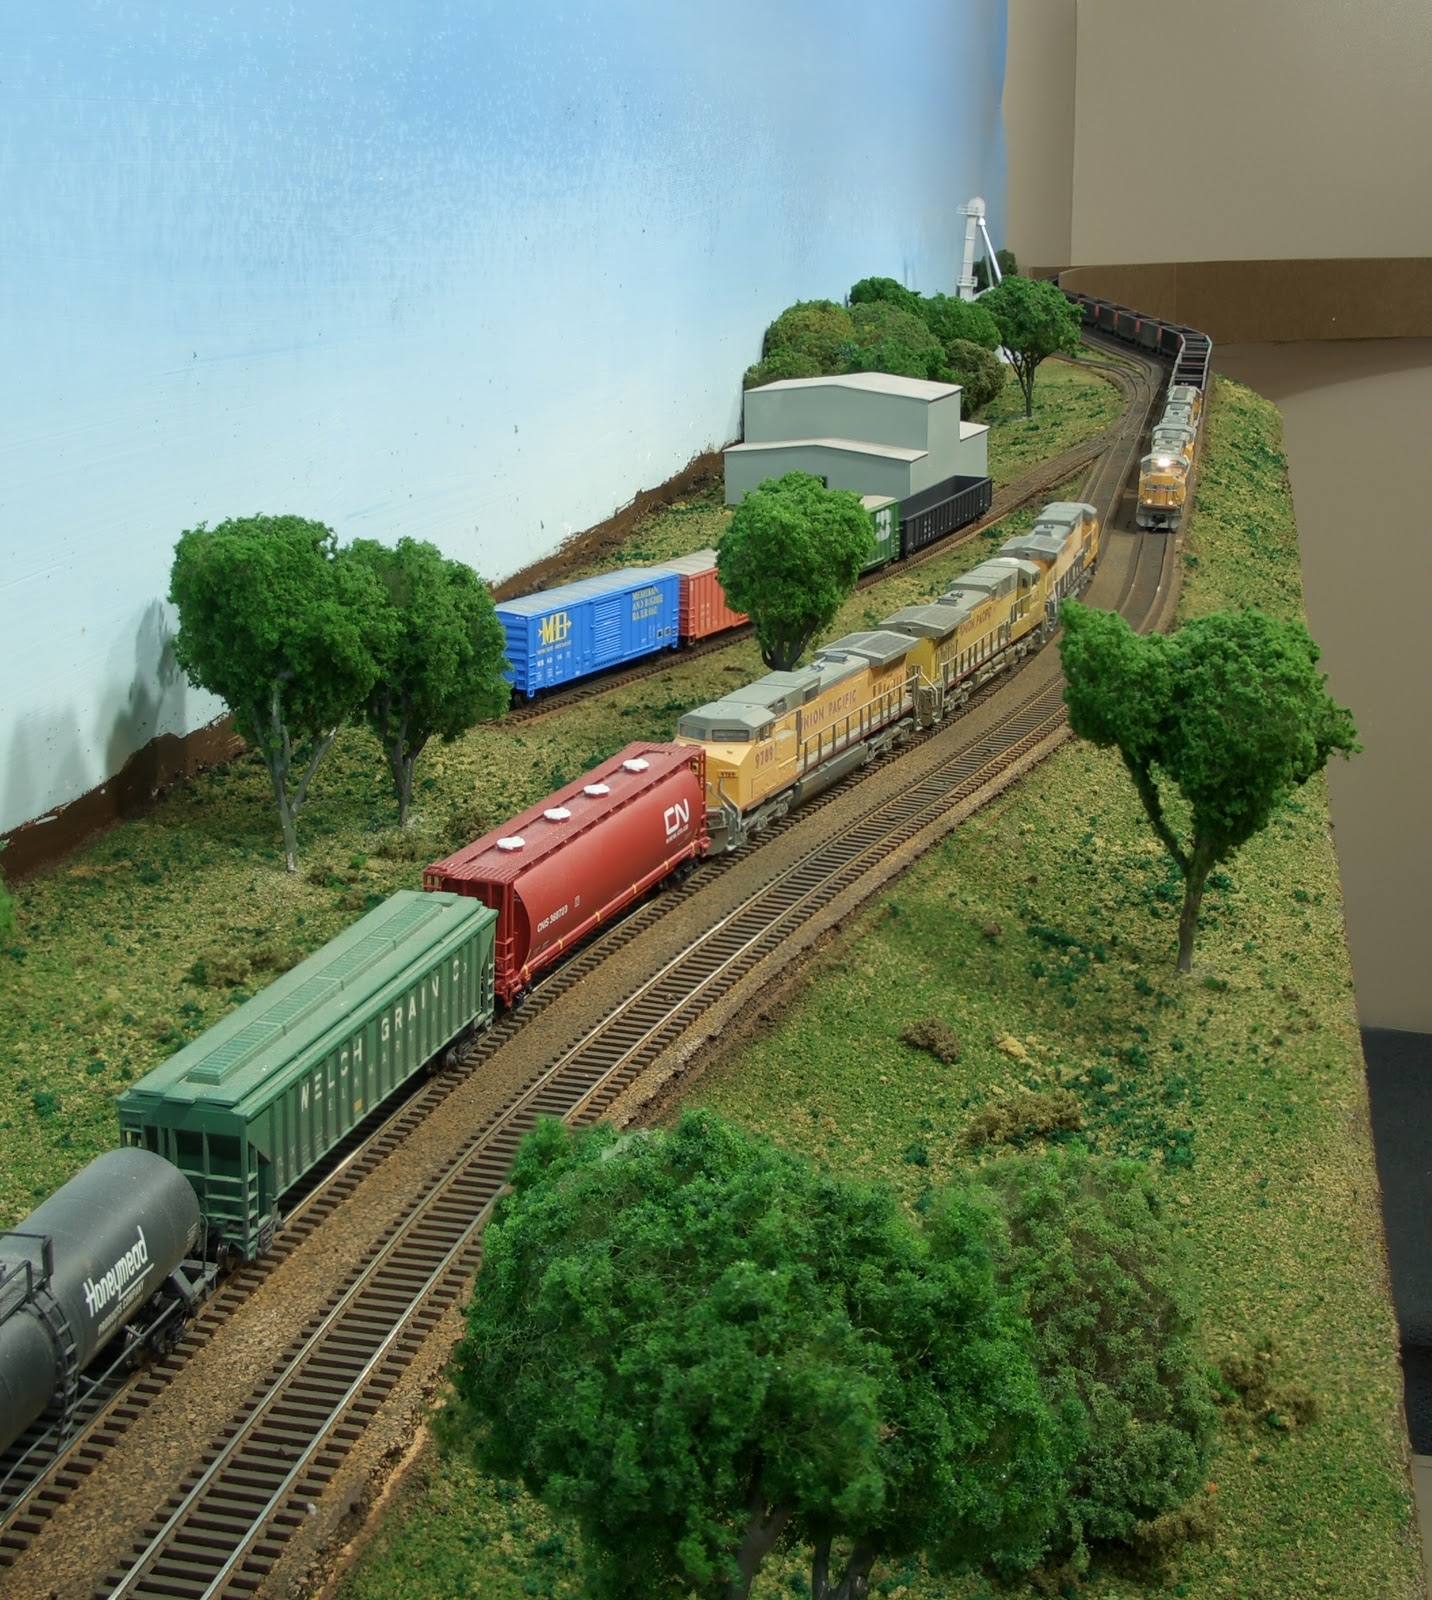 Great selection of Static Grass at Midwest Model RR